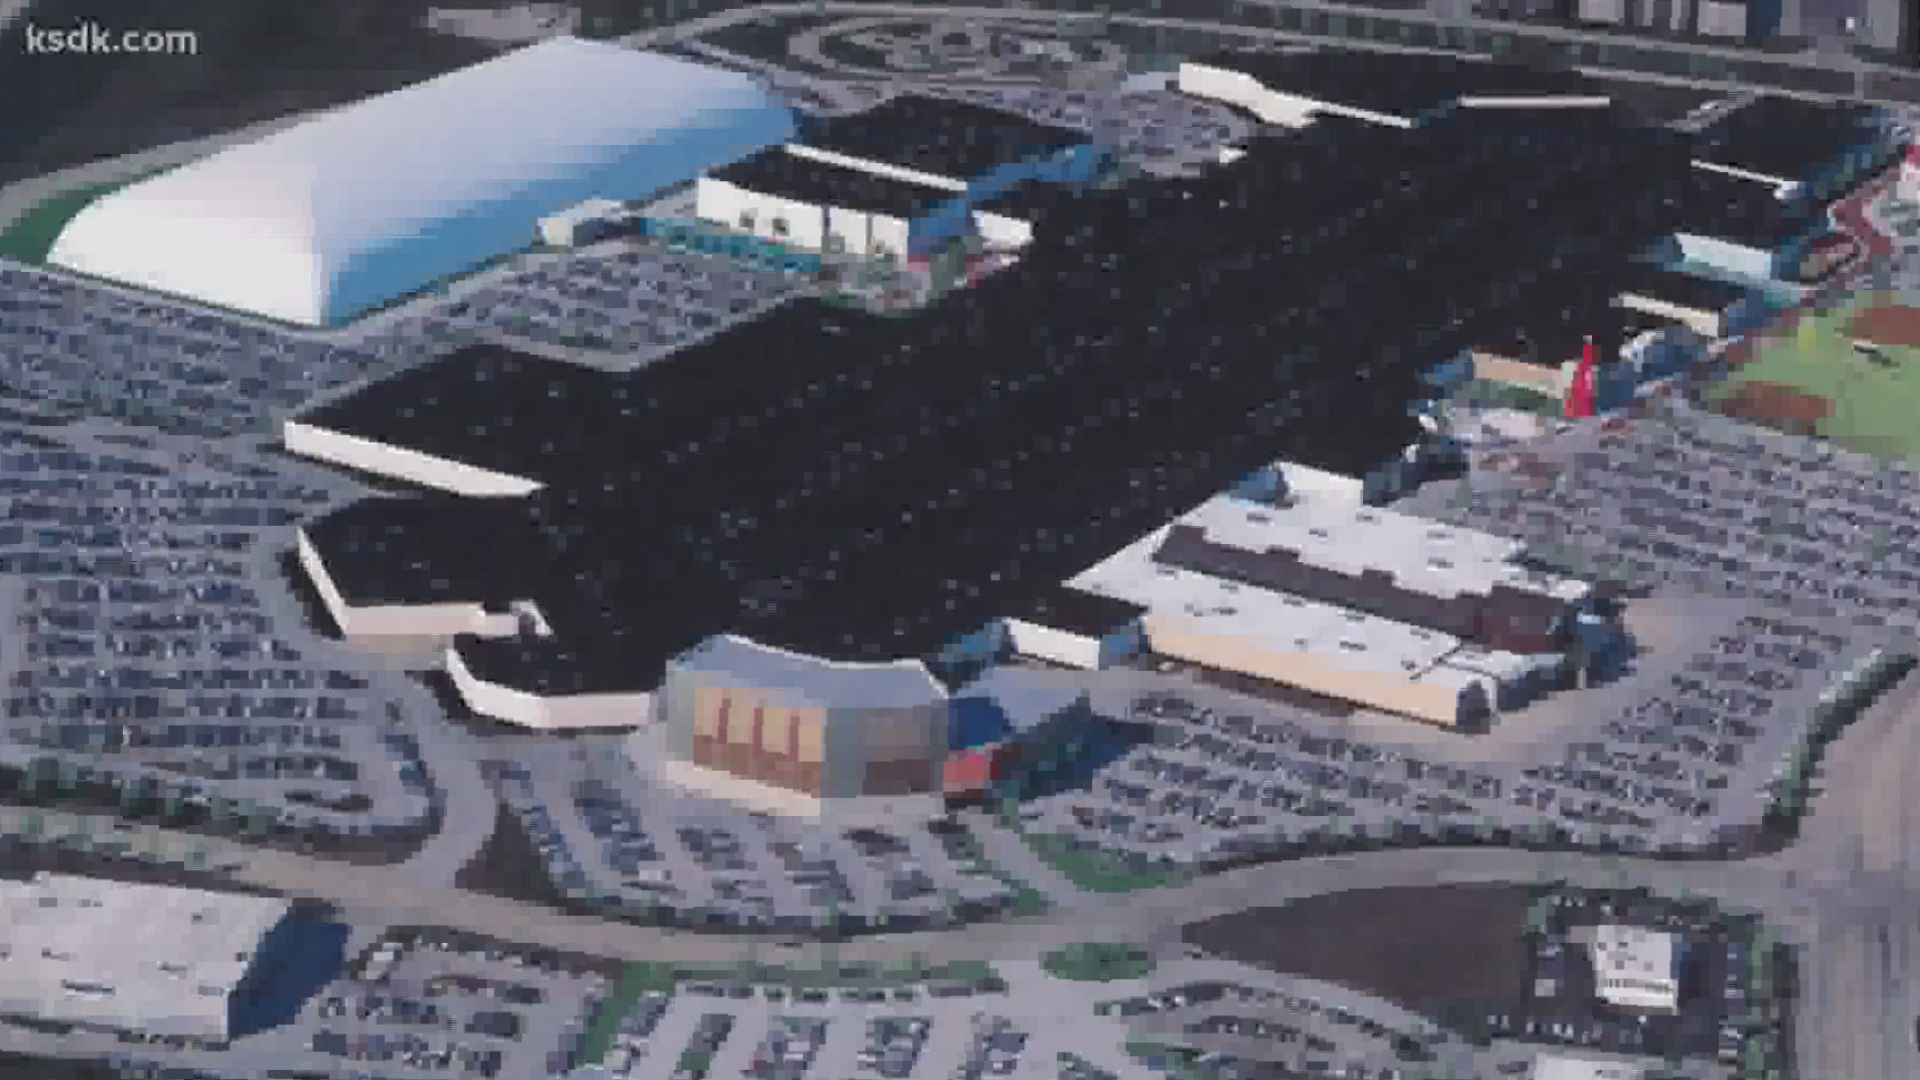 POWERplex will have drive-in concerts and movies